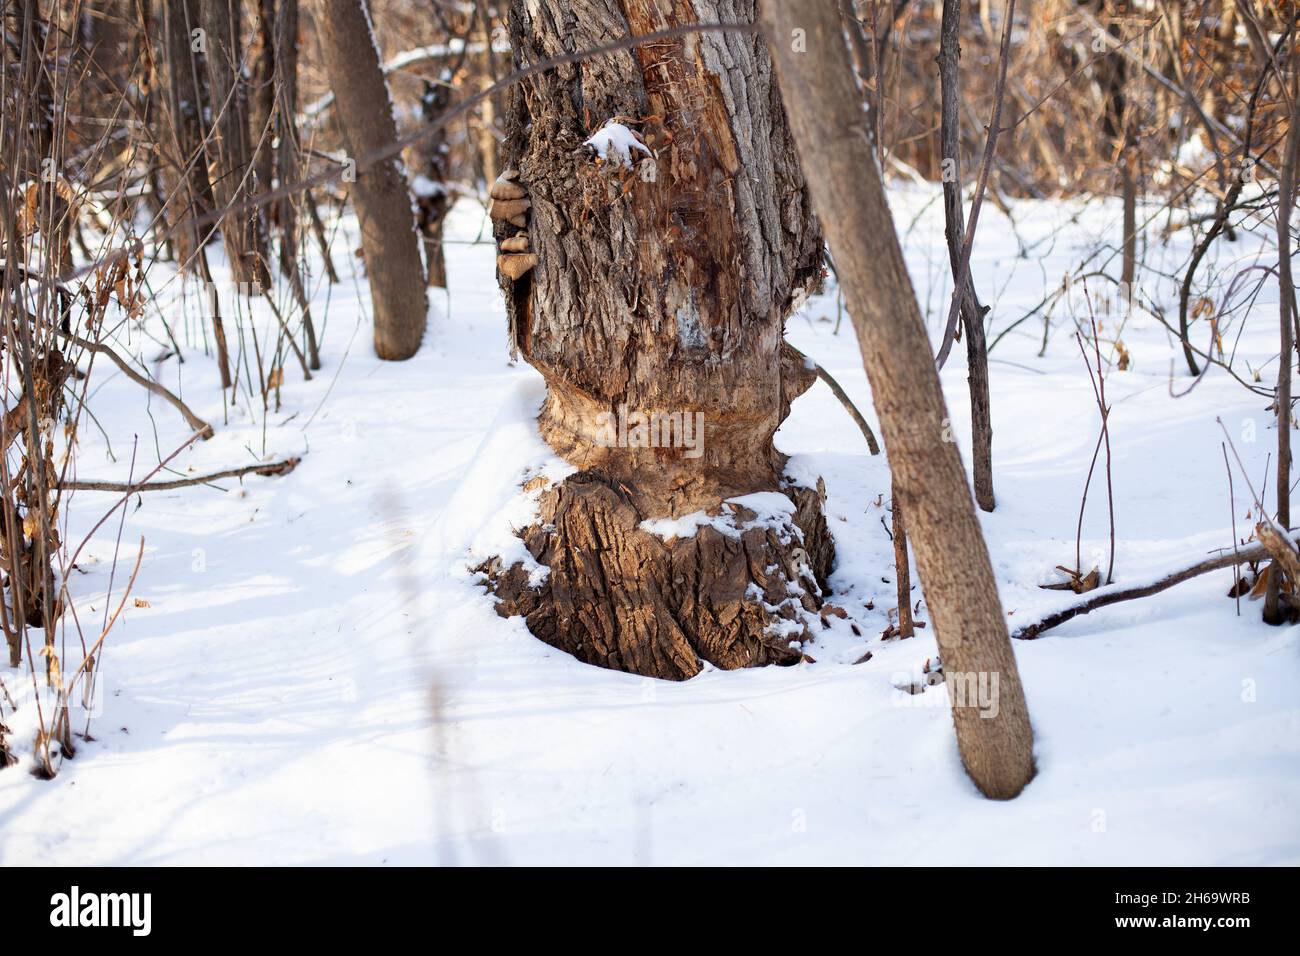 Old tree grows in winter forest. Close-up of tree trunk with marks from beaver teeth and covered with snow, young trees grow nearby Stock Photo